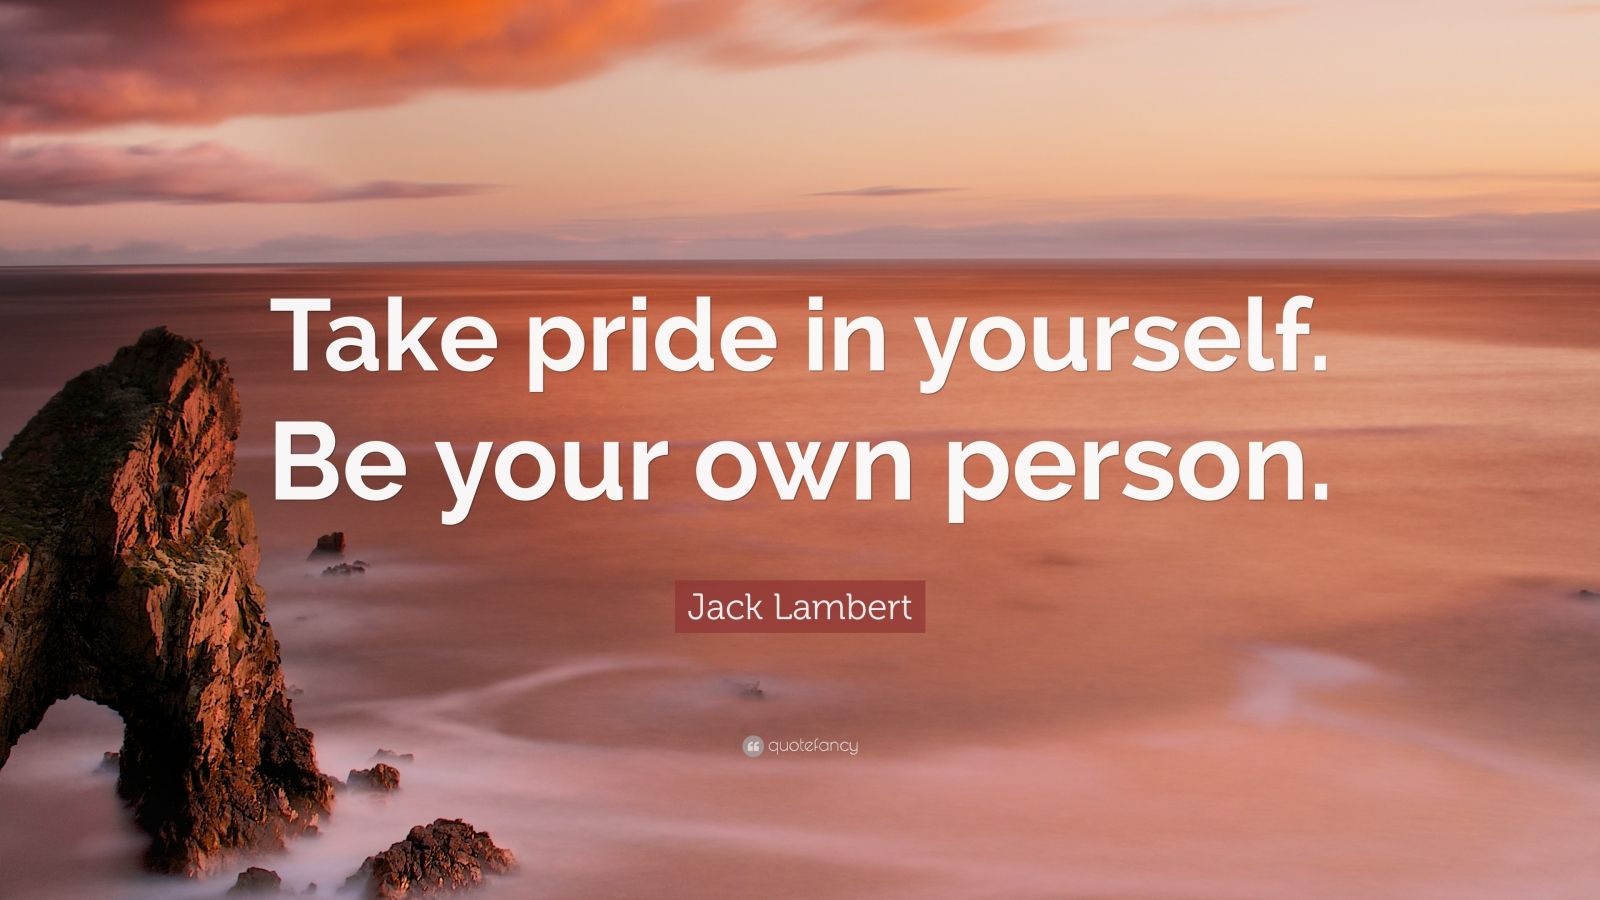 Jack Lambert Quote: “Take pride in yourself. Be your own person.” (9